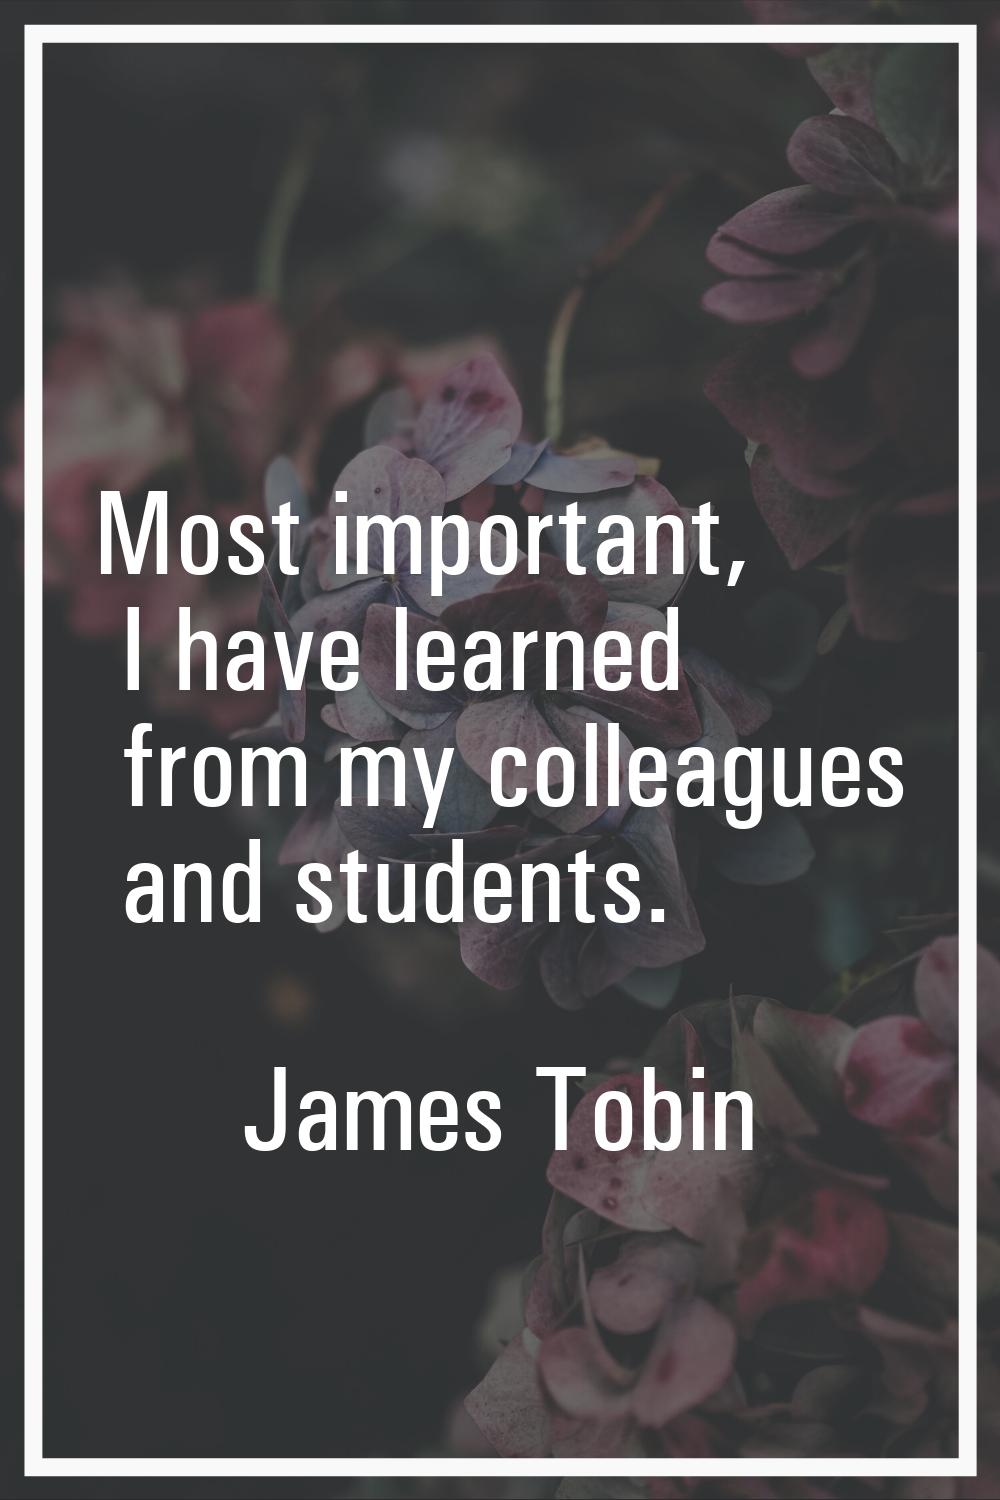 Most important, I have learned from my colleagues and students.